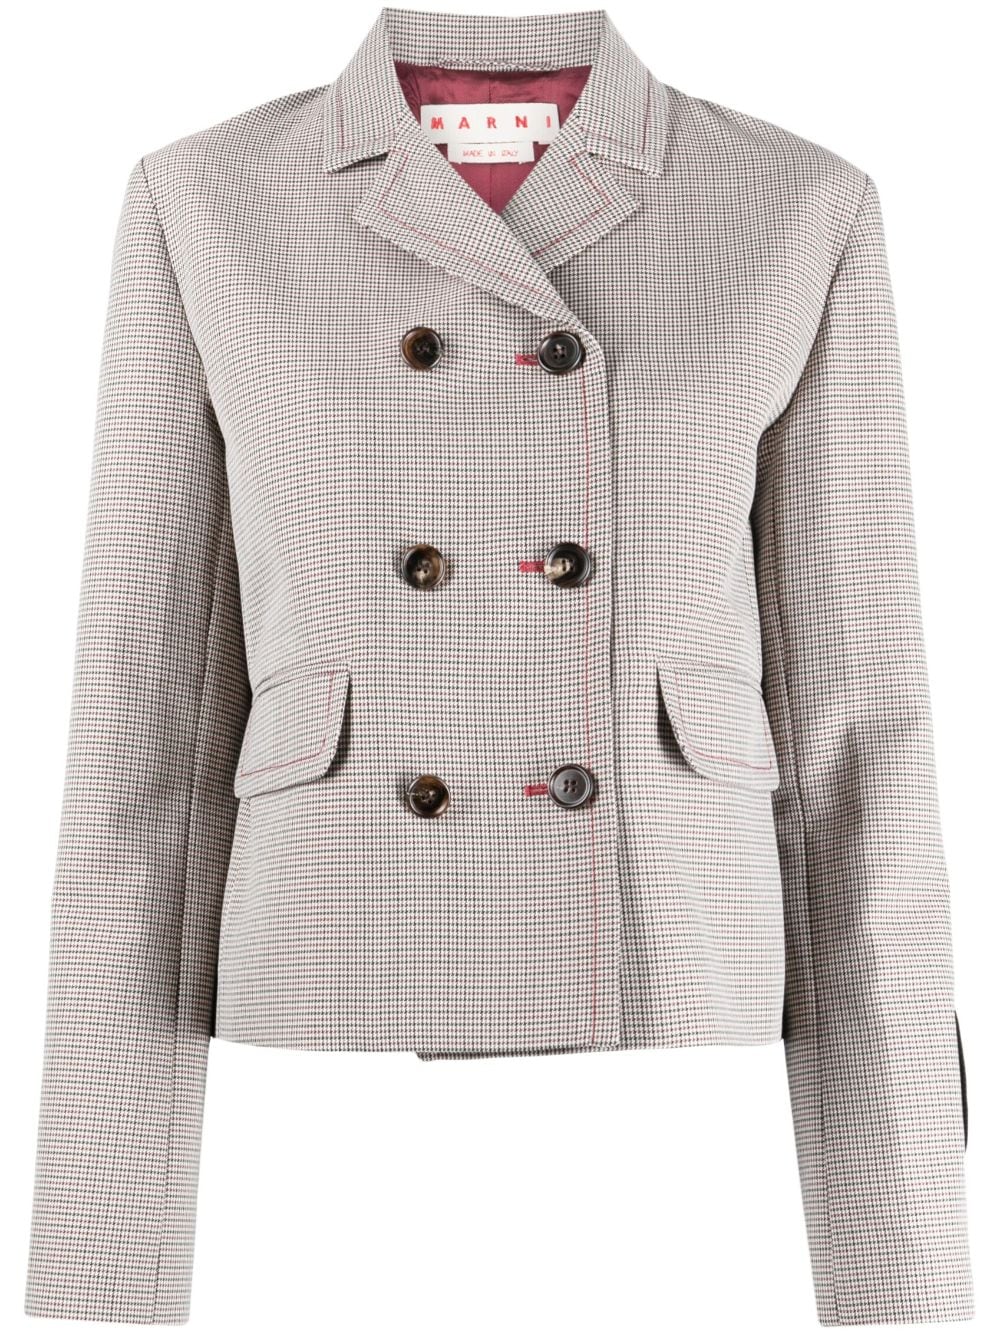 MARNI houndstooth-pattern double-breasted blazer-0